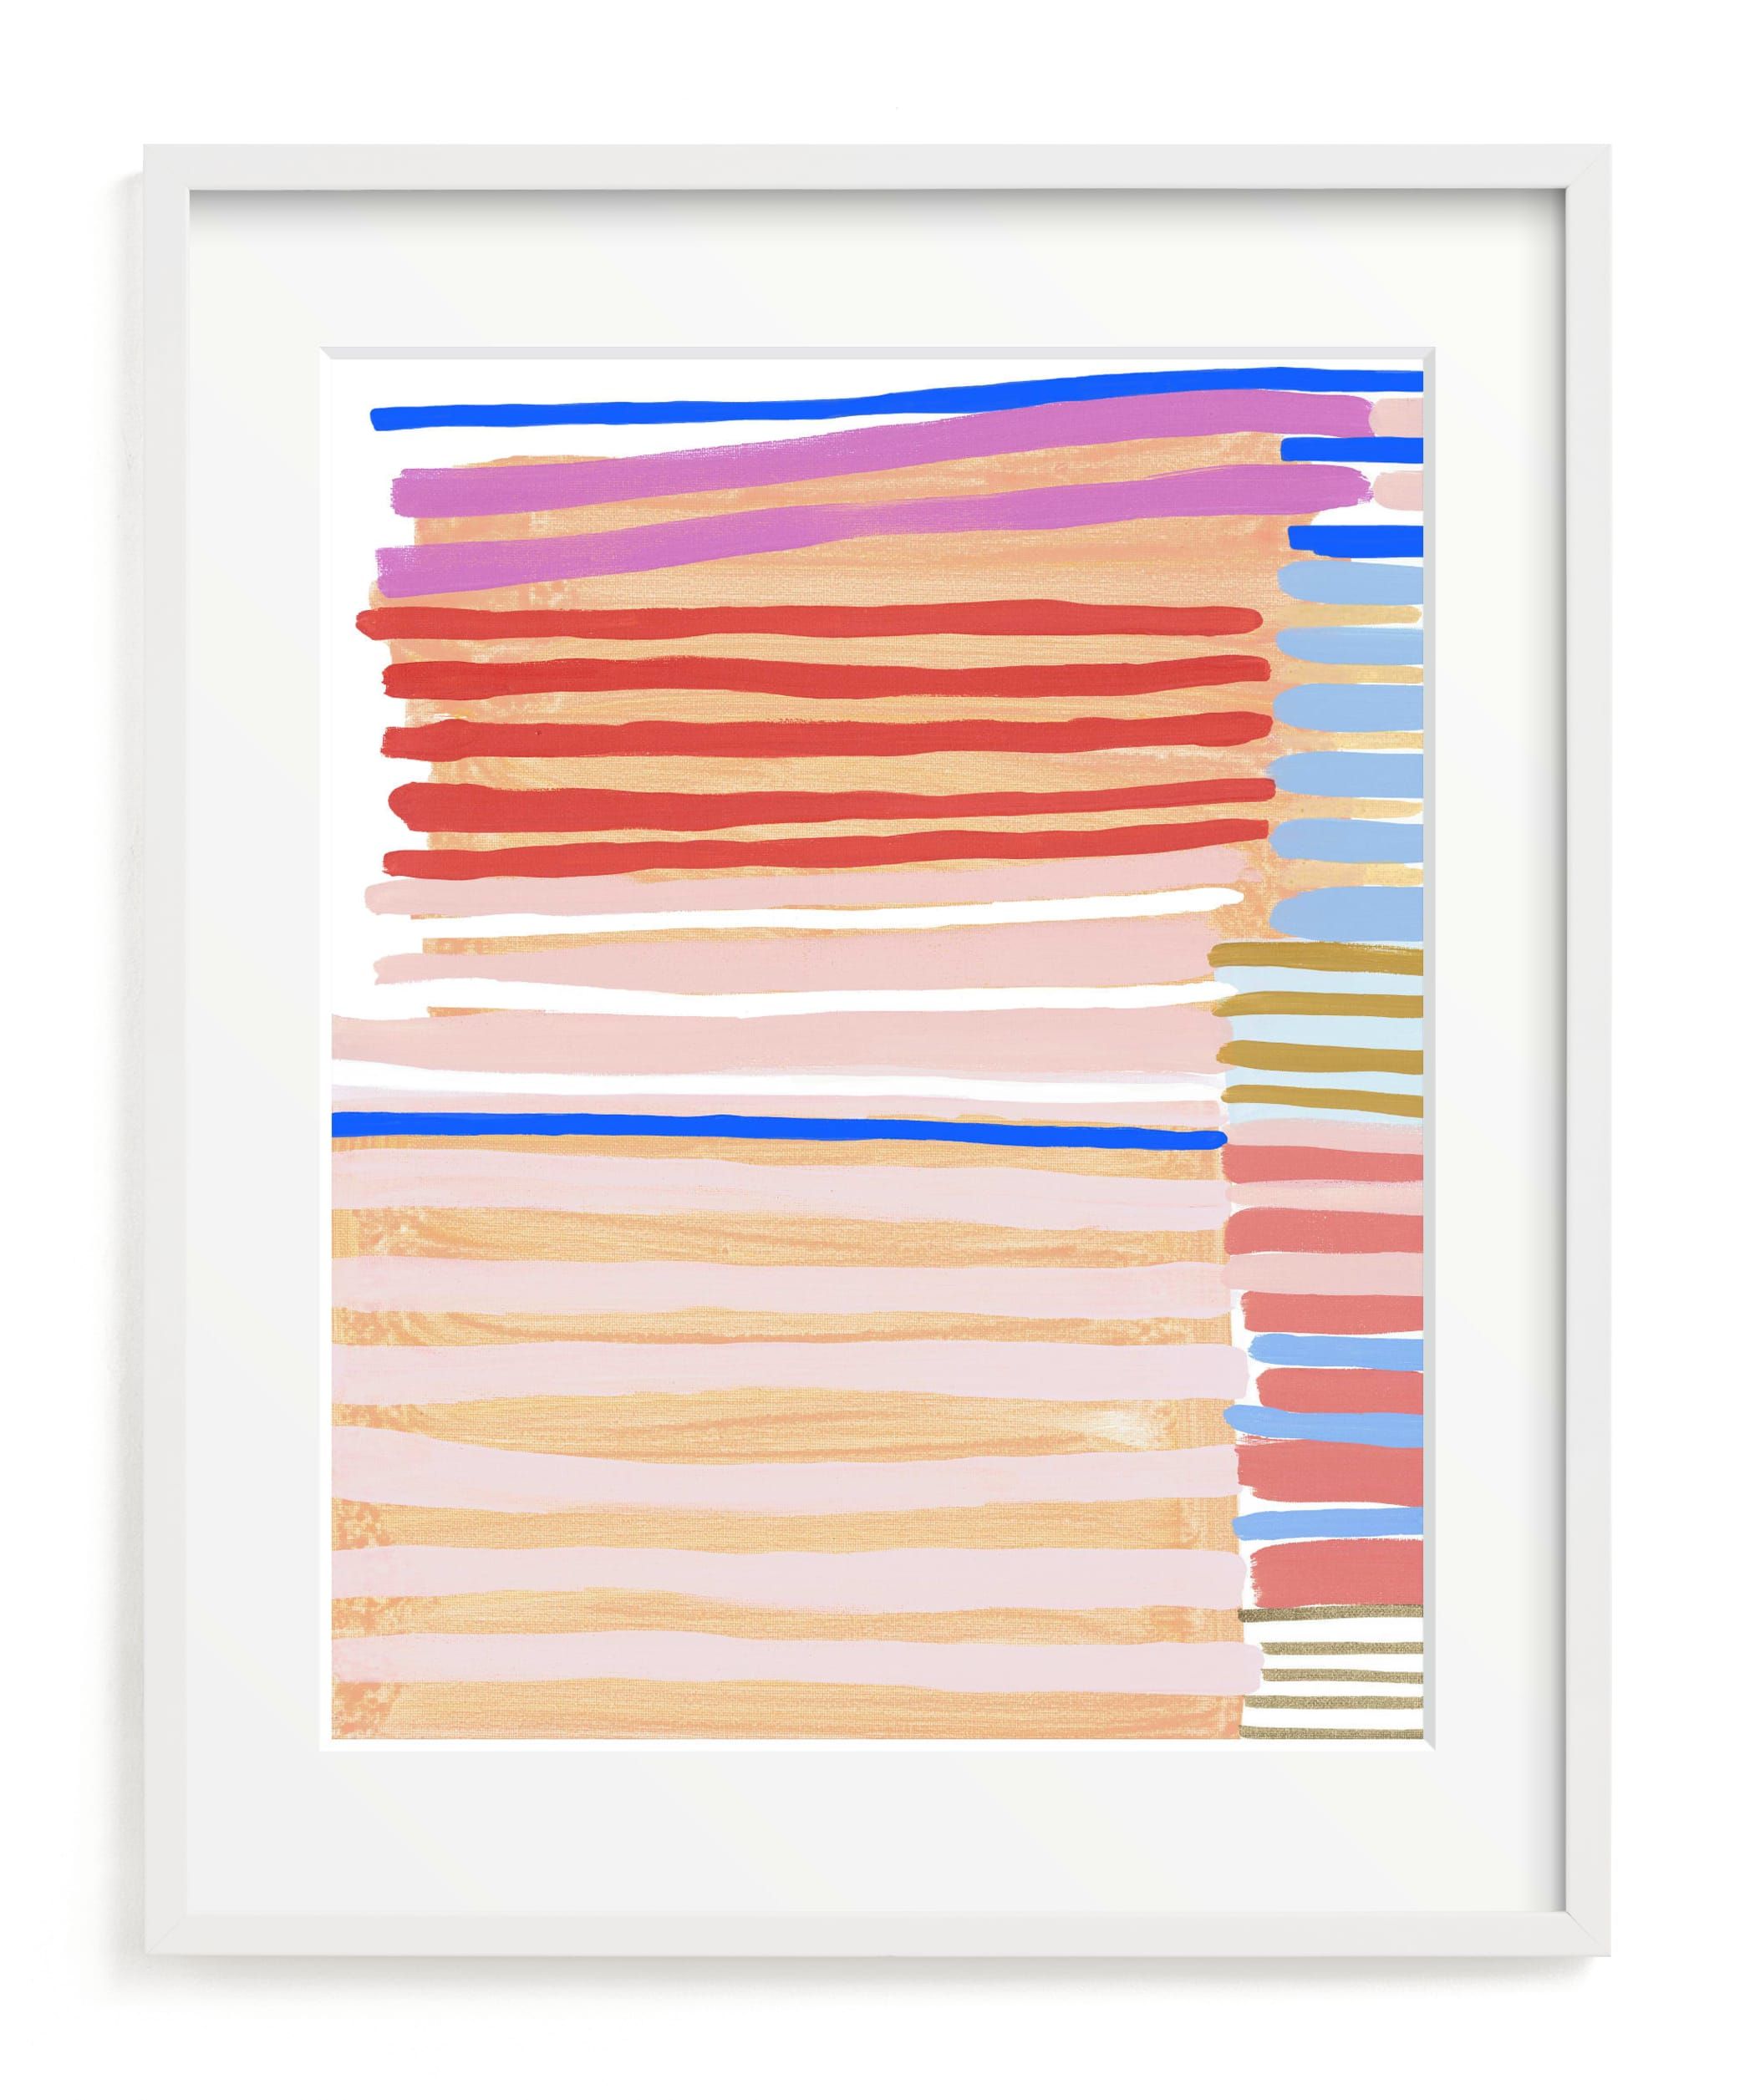 "Peach Party One" - Painting Limited Edition Art Print by Katie Craig. | Minted